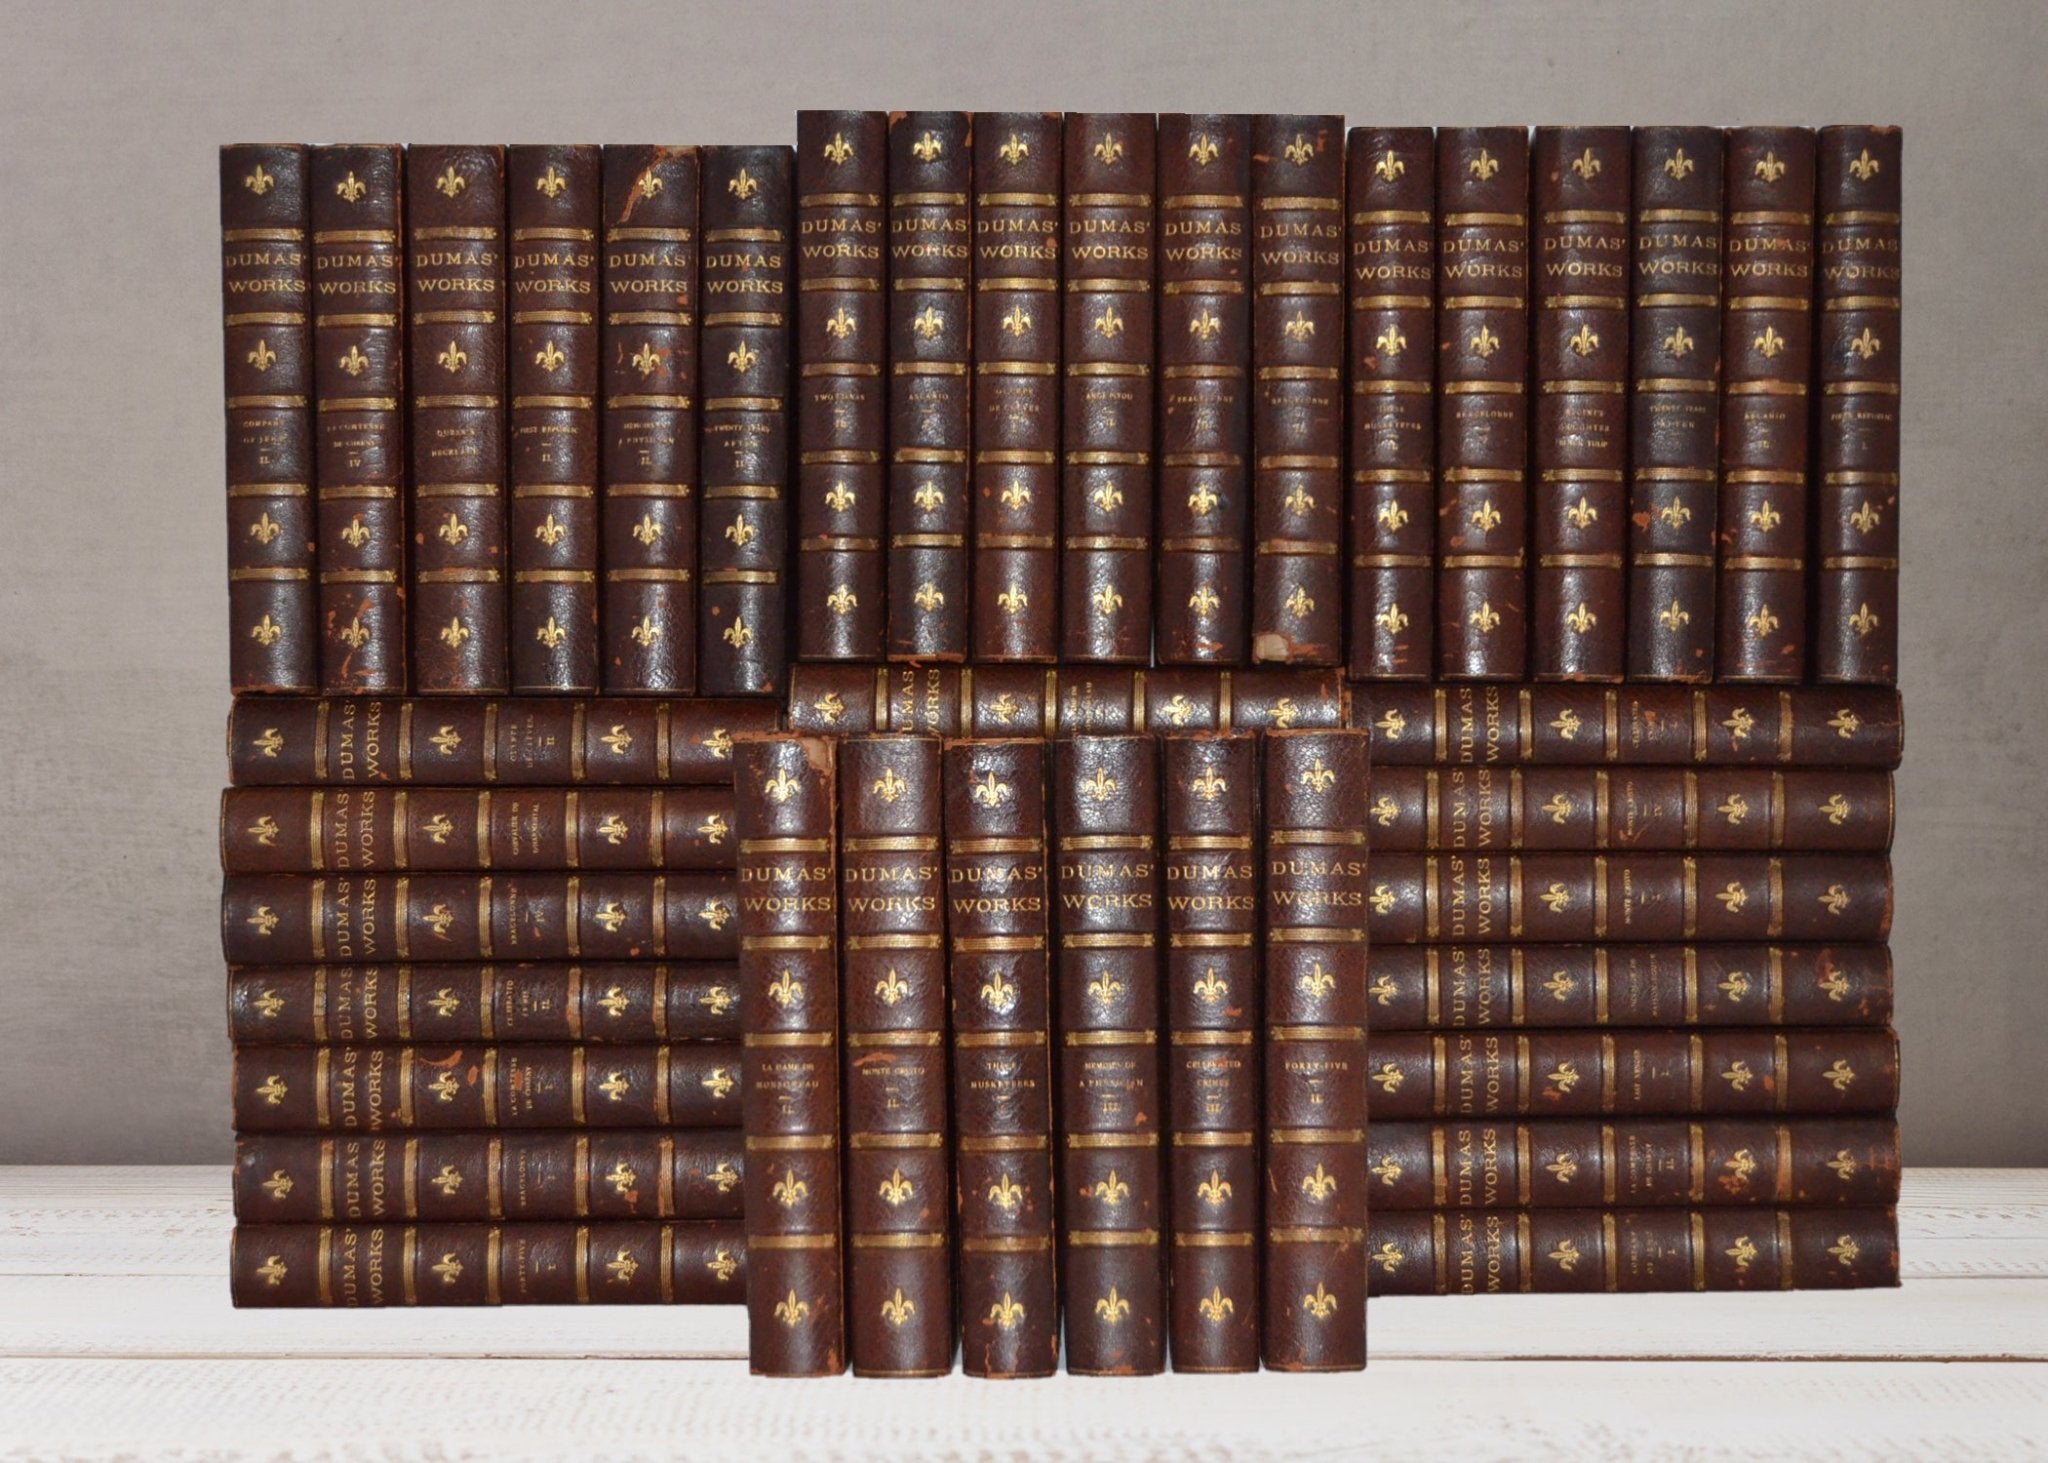 Limited Edition Works of Alexandre Dumas in 45 Volumes – Dana Estes c 1900 - Brookfield Books